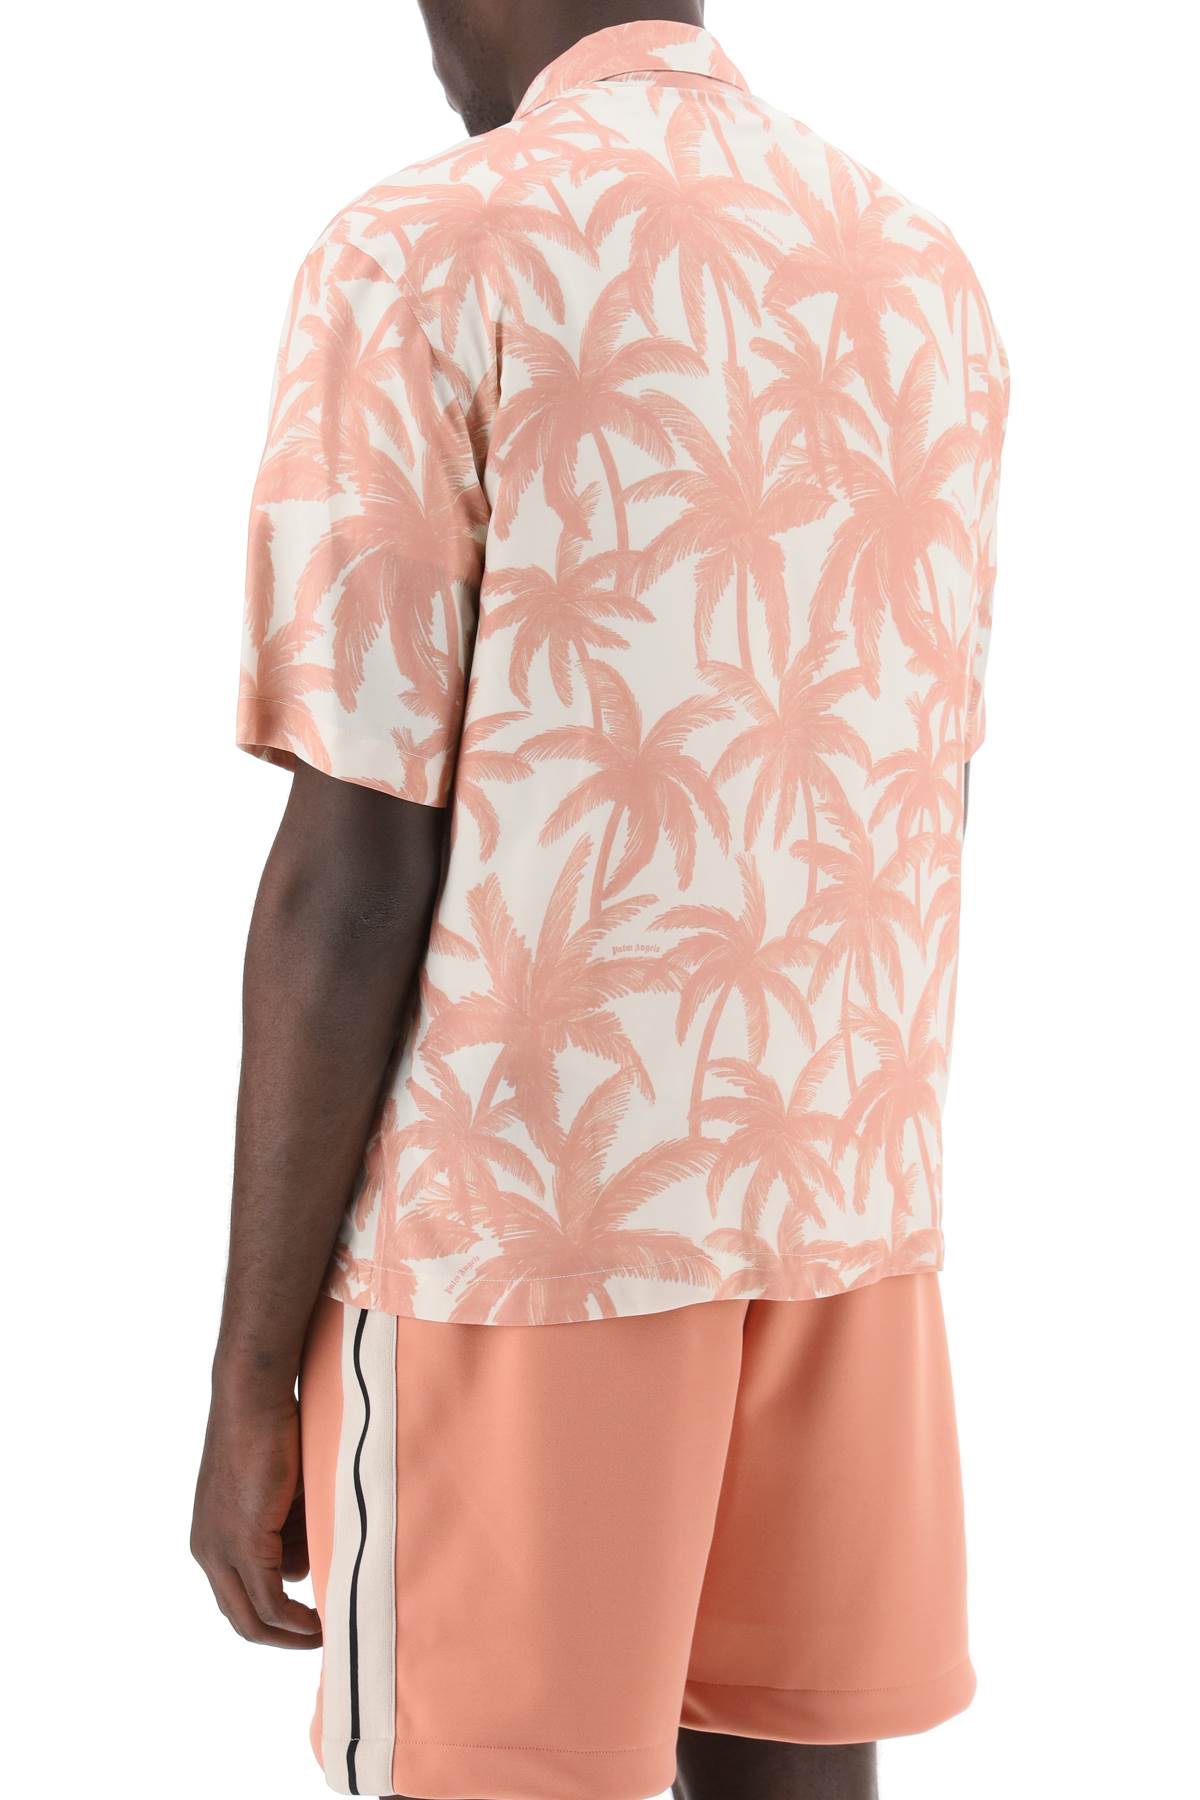 Shop Palm Angels Bowling Shirt With Palms Motif In Off-white/pink